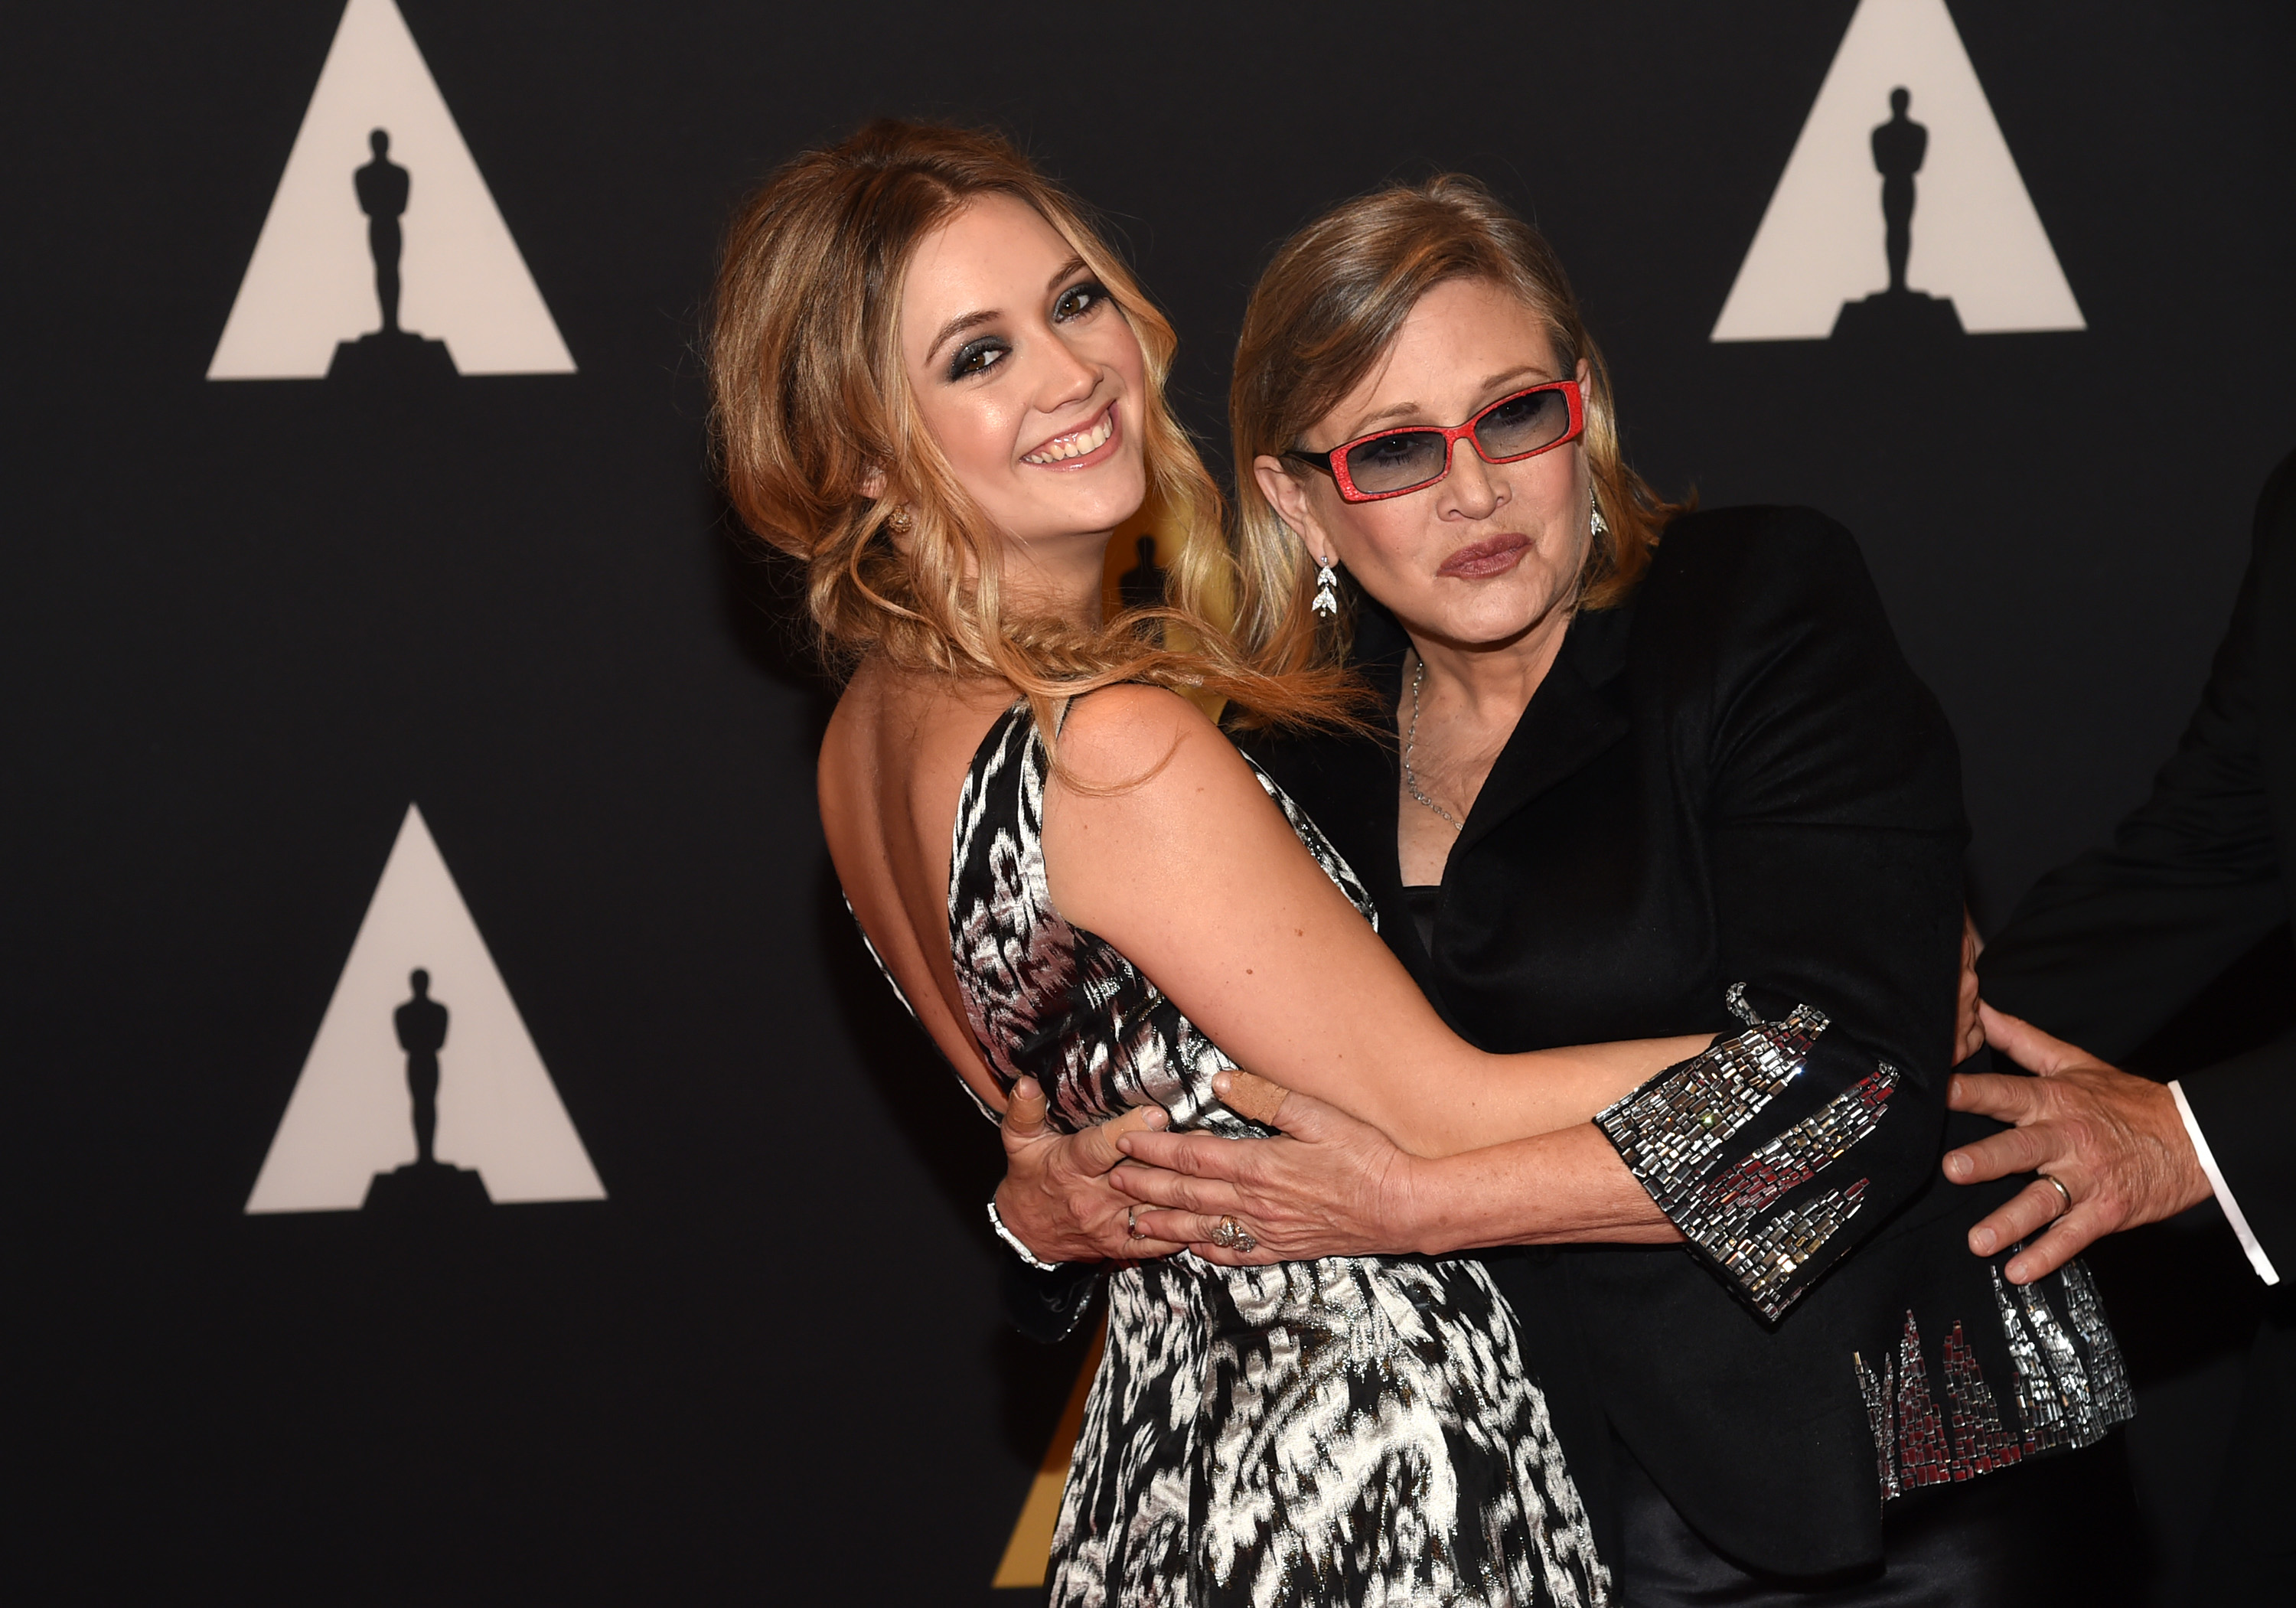 Billie Lourd and Carrie Fisher at the 7th Annual AMPAS Governors Awards, Arrivals, in Los Angeles, on November 14, 2015. | Source: Getty Images